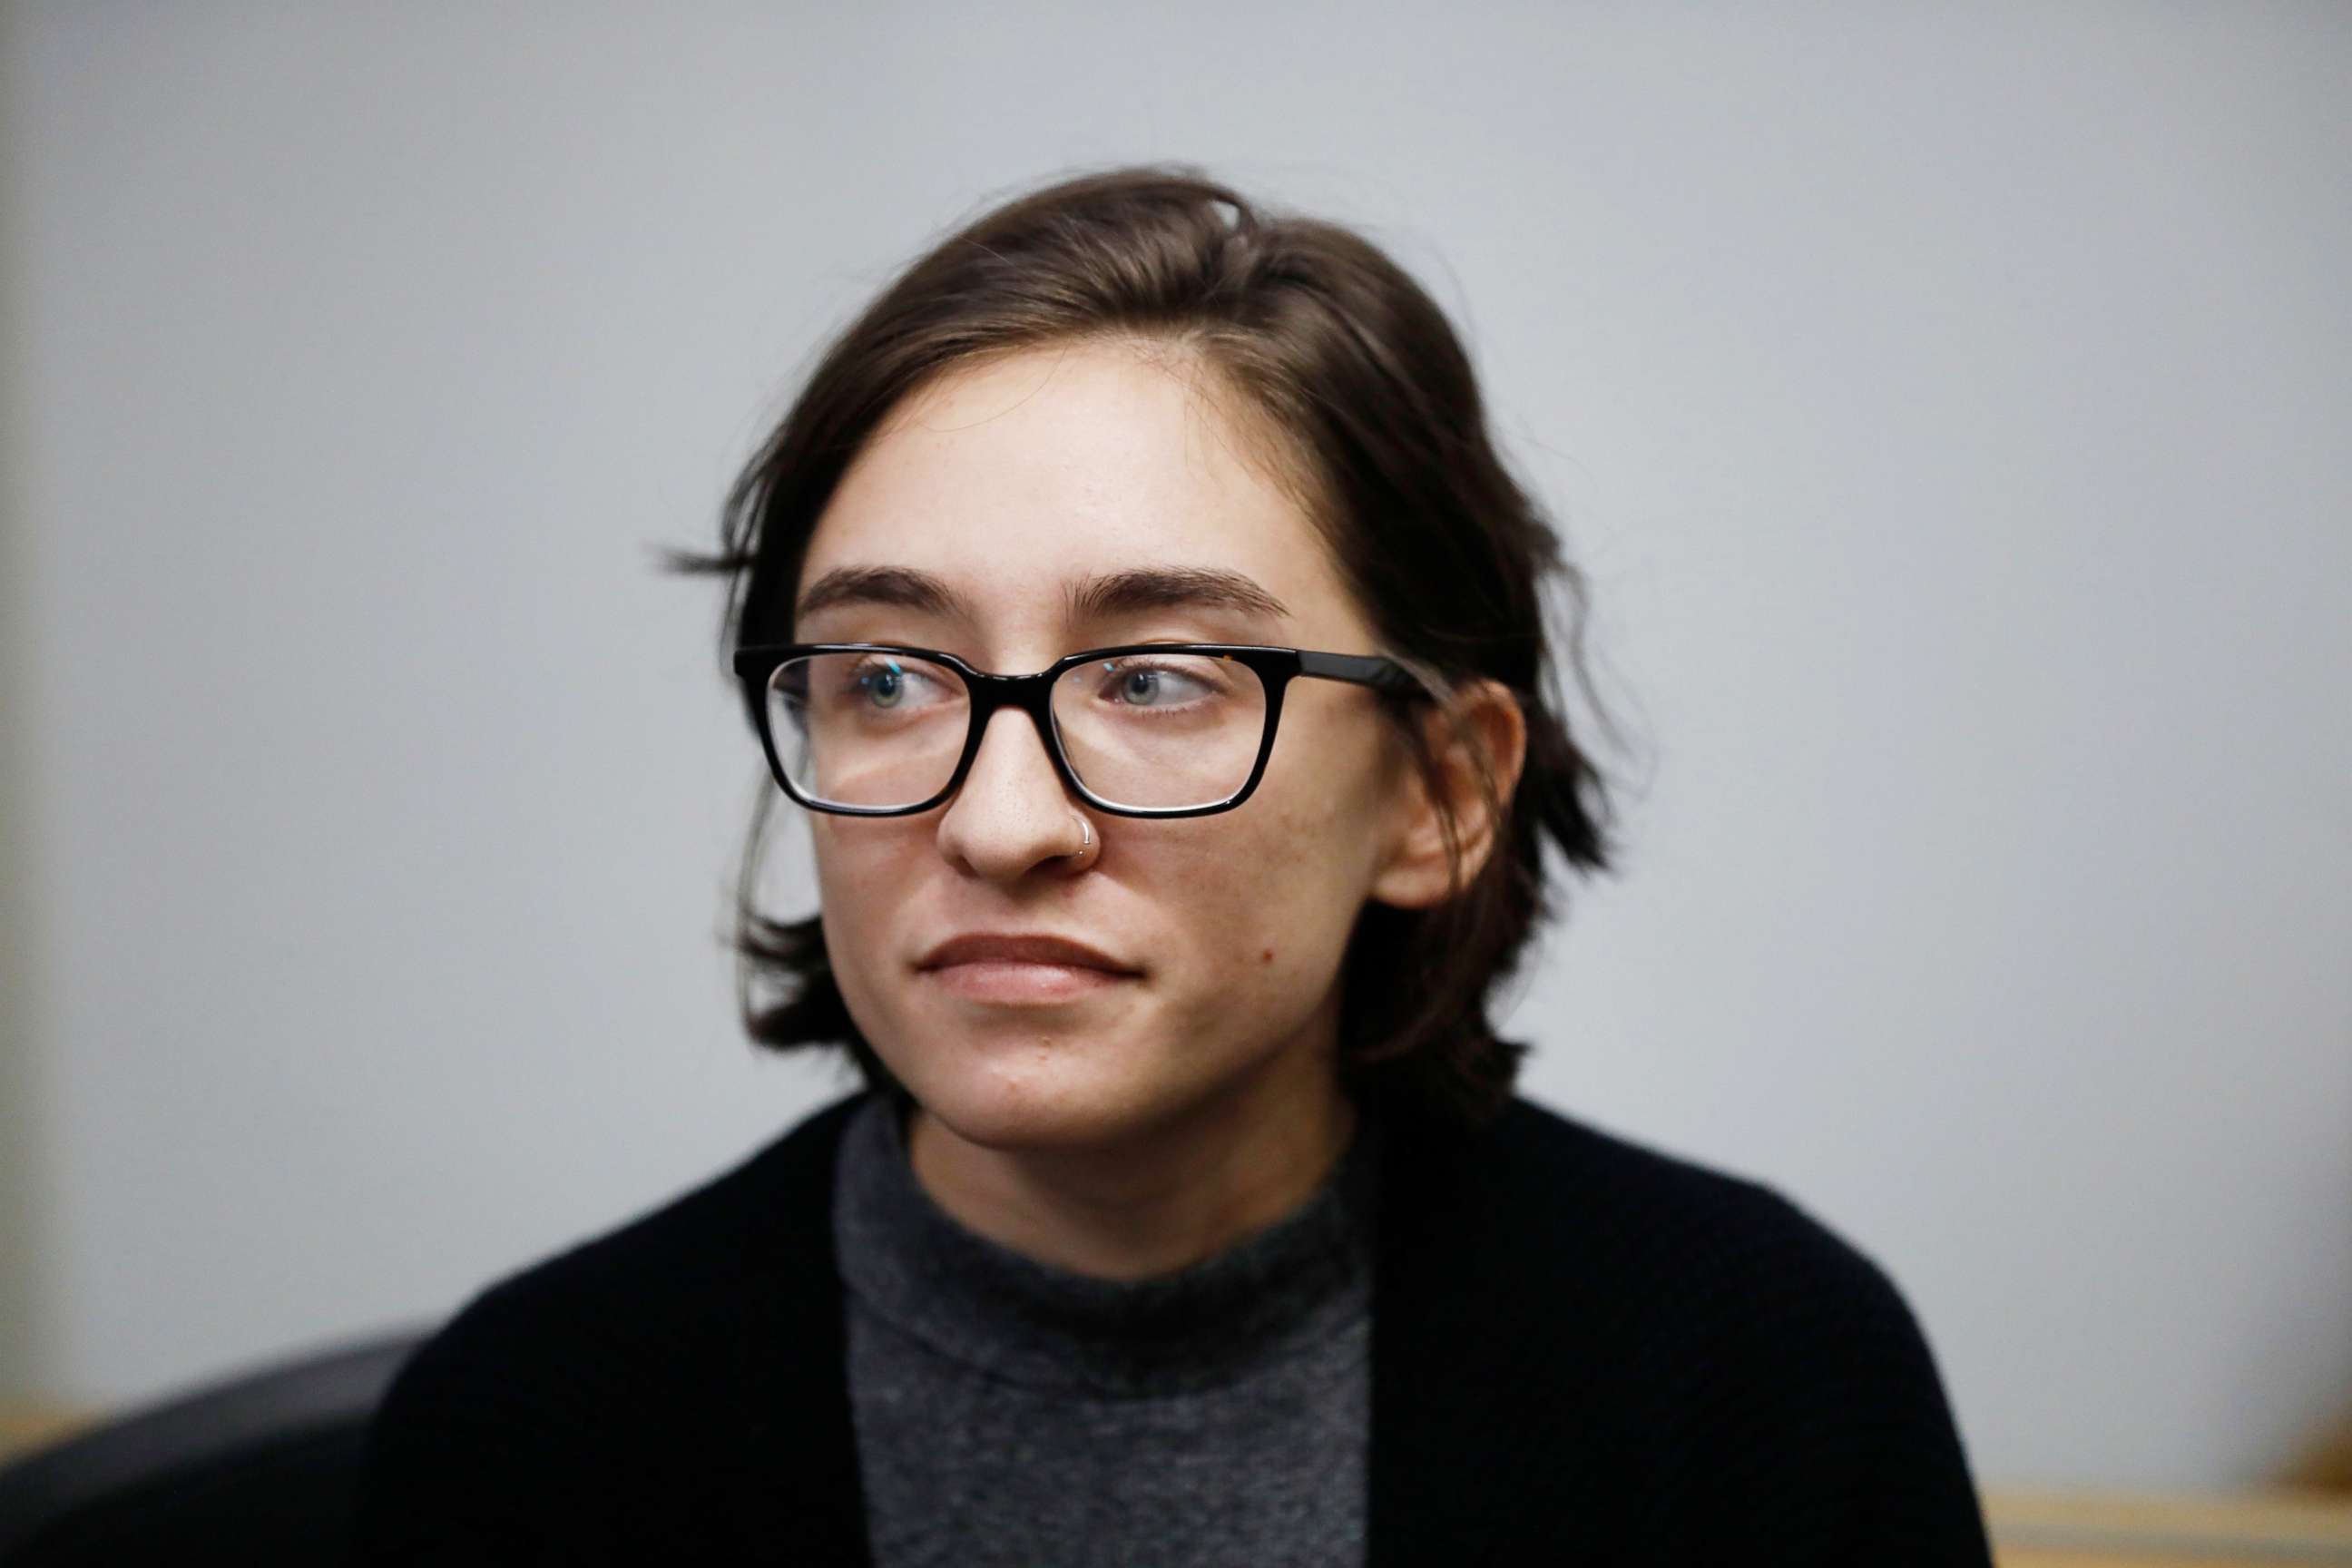 PHOTO: US citizen student, 22-year-old Lara Alqasem, attends a hearing at the Tel Aviv District Court in Israel, Oct. 11, 2018. 